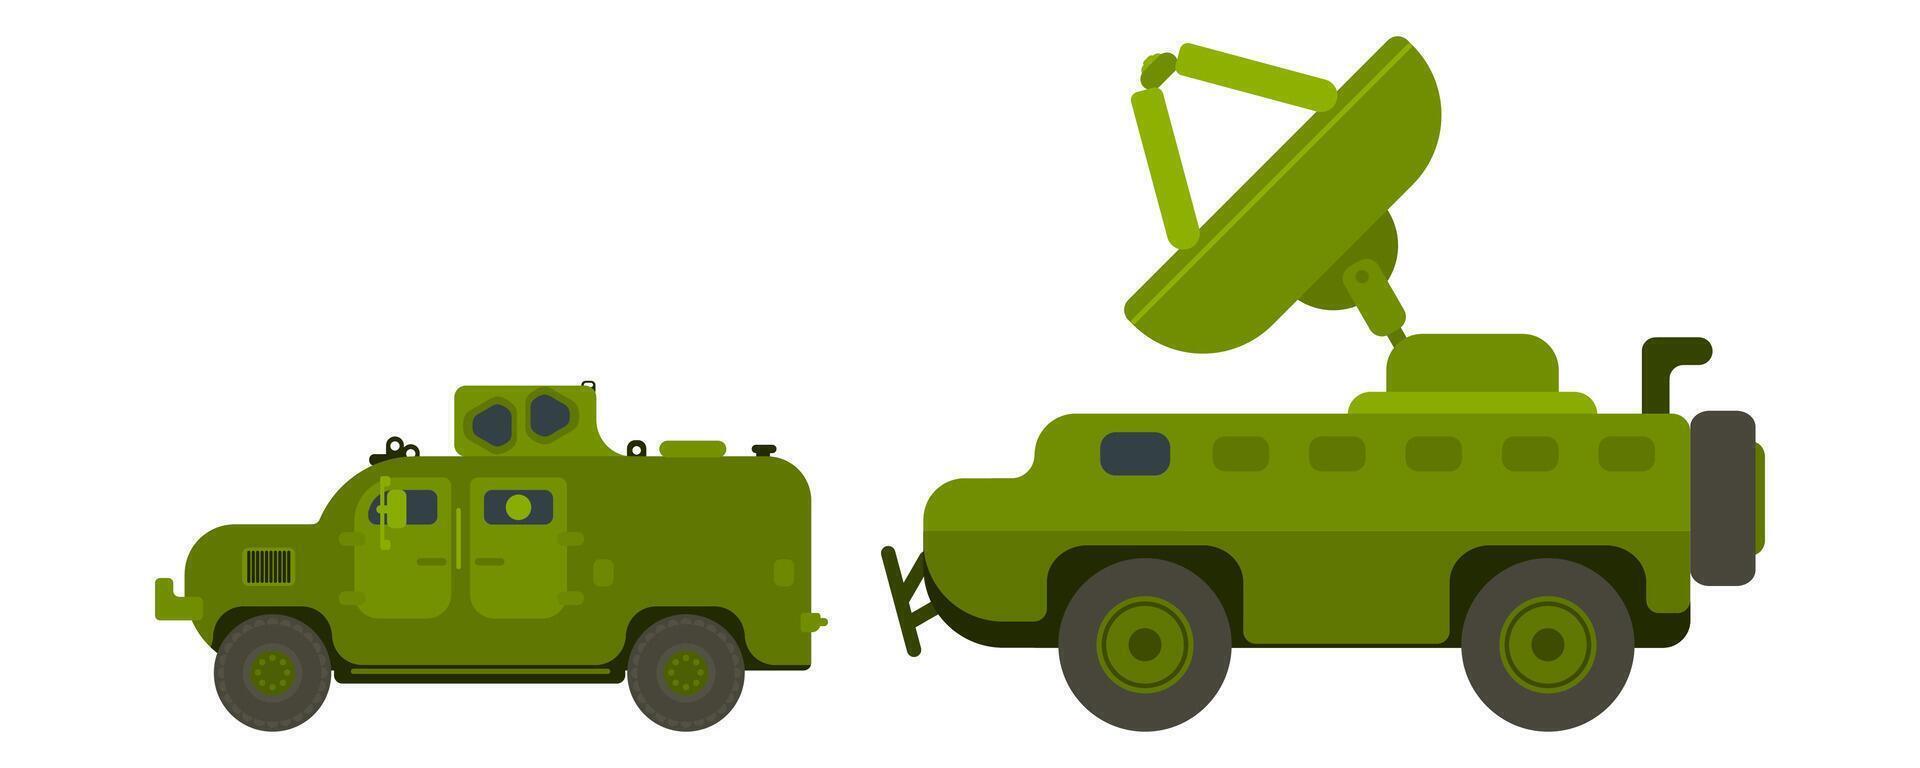 Military trucks for landing and new for the army vector